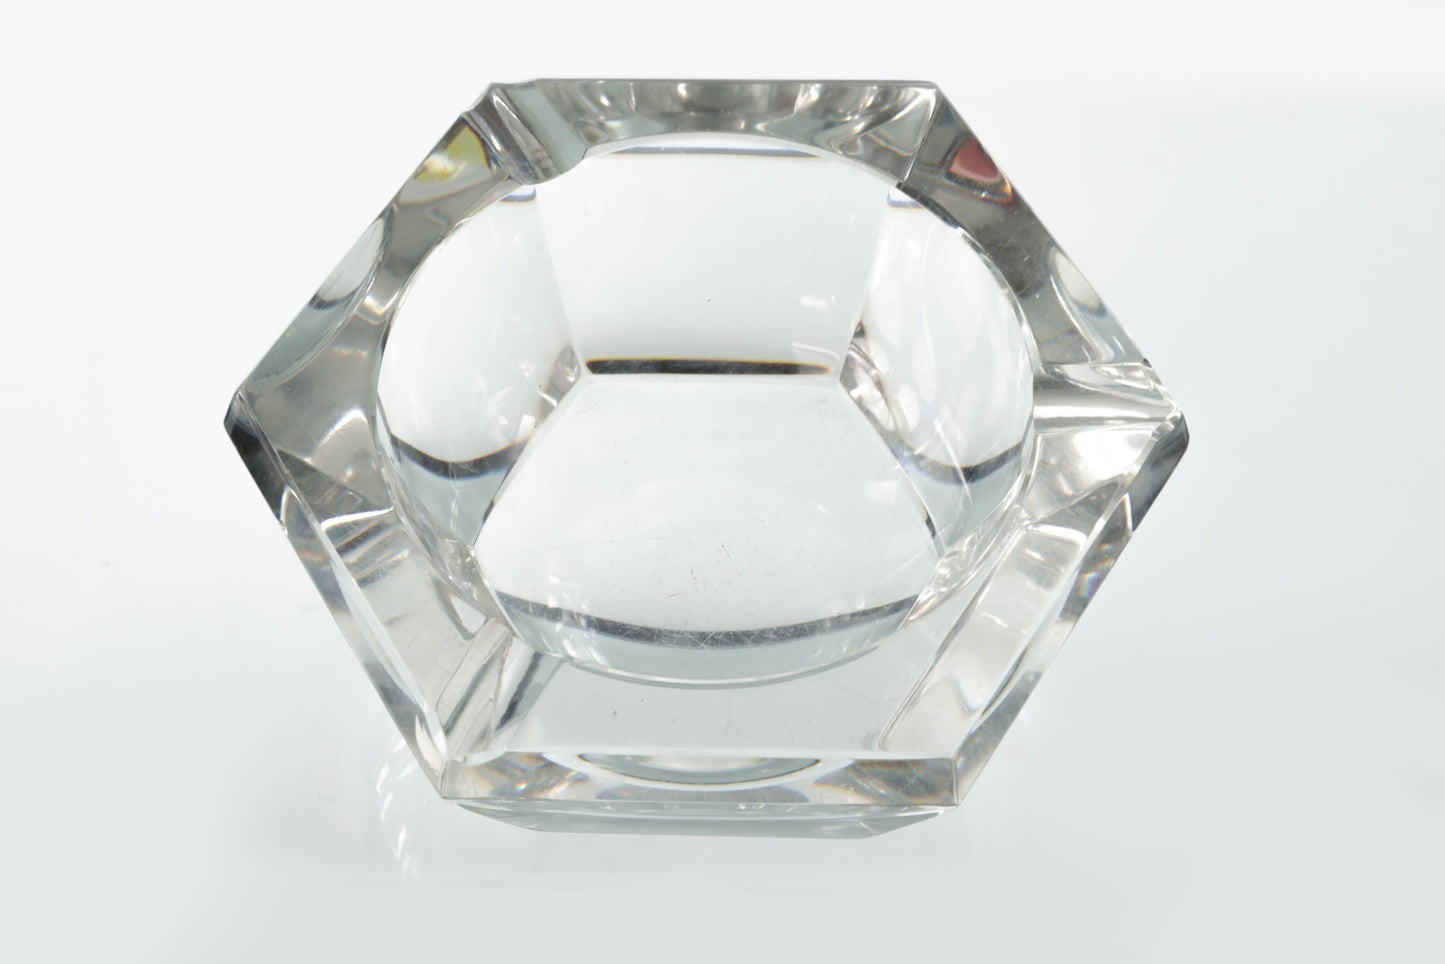 Hexagonal glass ashtray from the 70s